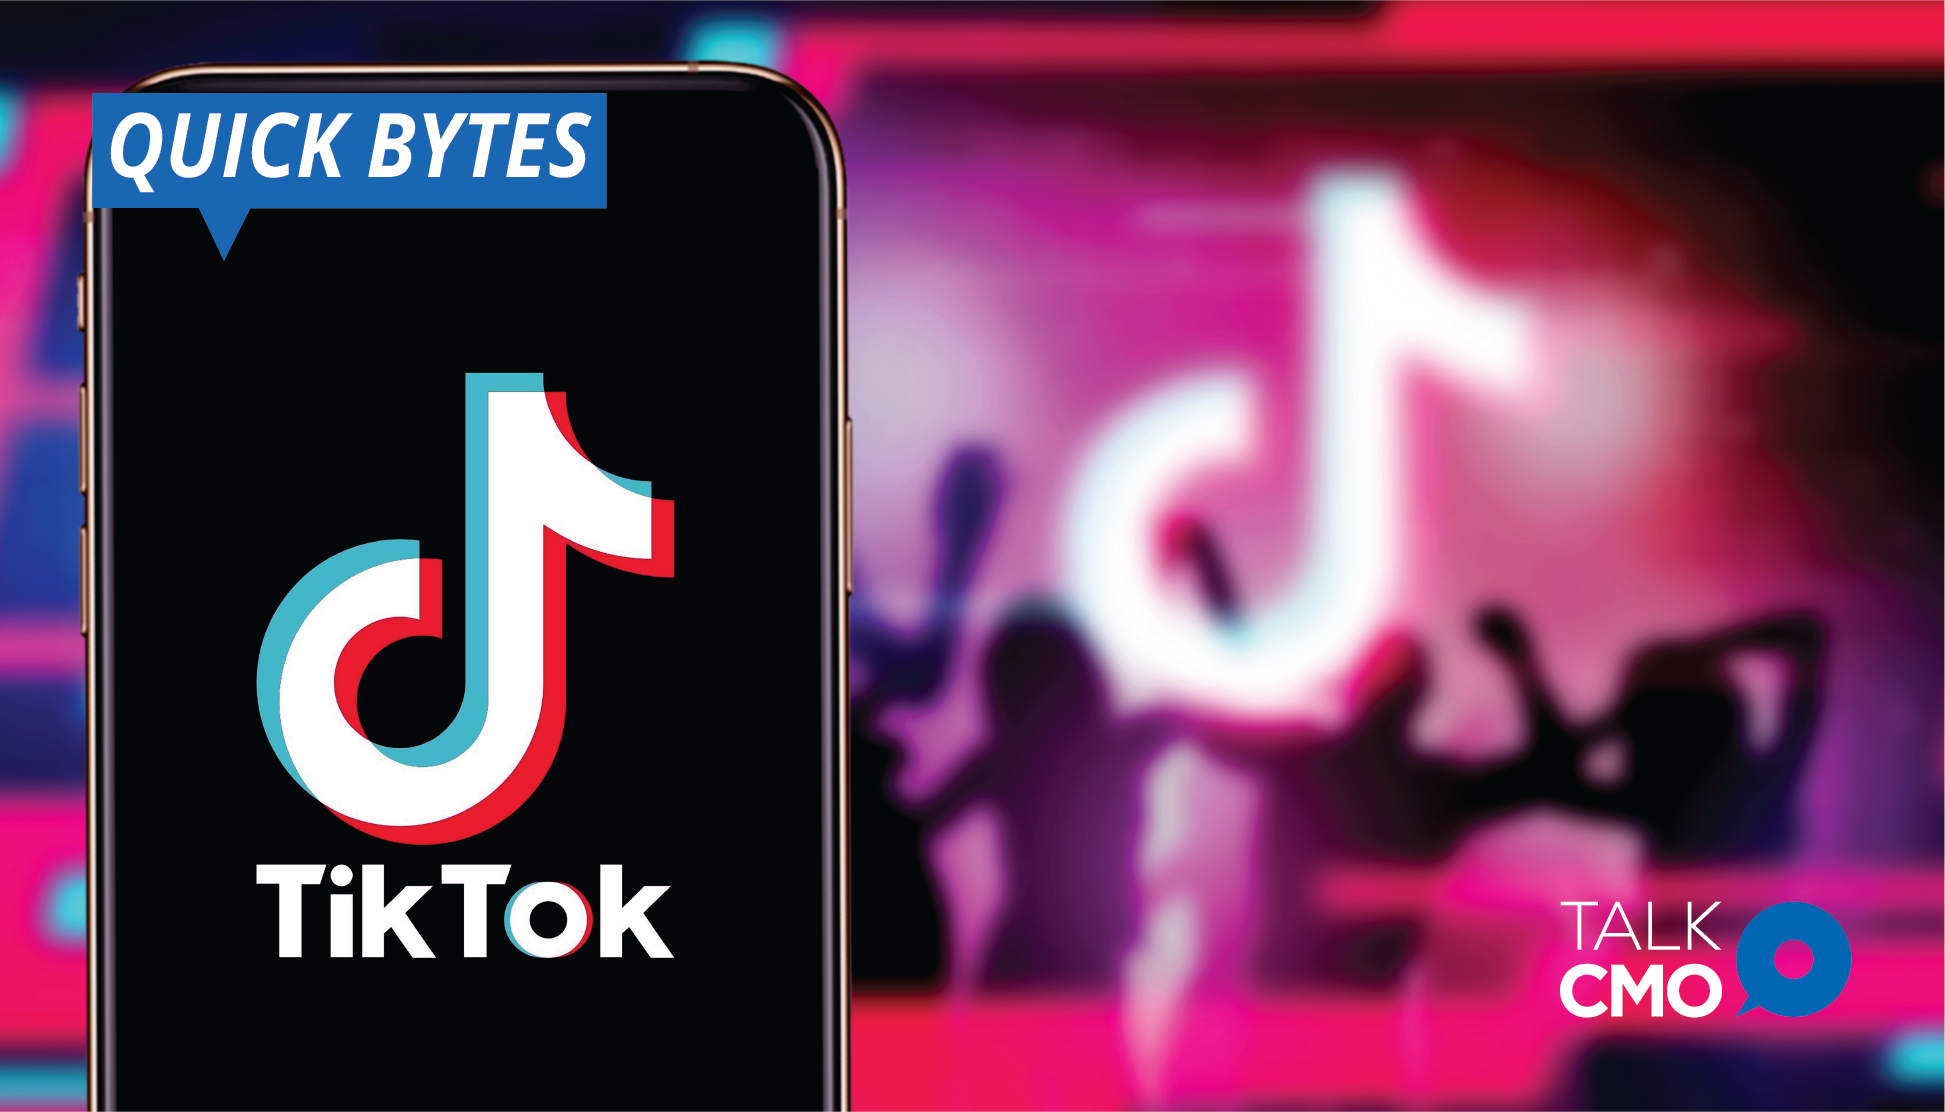 TikTok Introduces New Interactive Market Insights Tool to Aid Strategic Planning